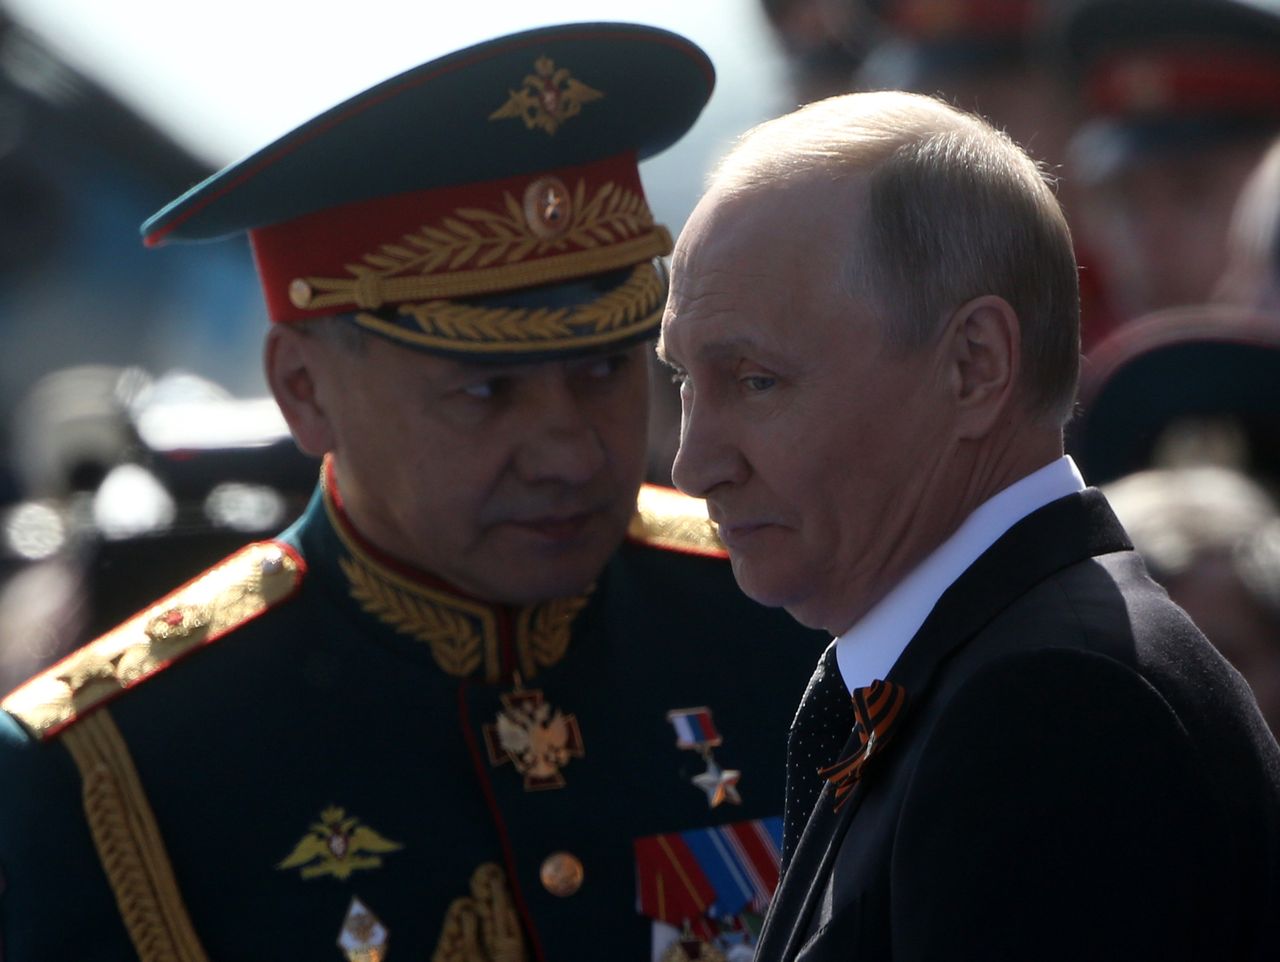 Victory Day amidst shadows: Russia's strength and Ukraine's resilience